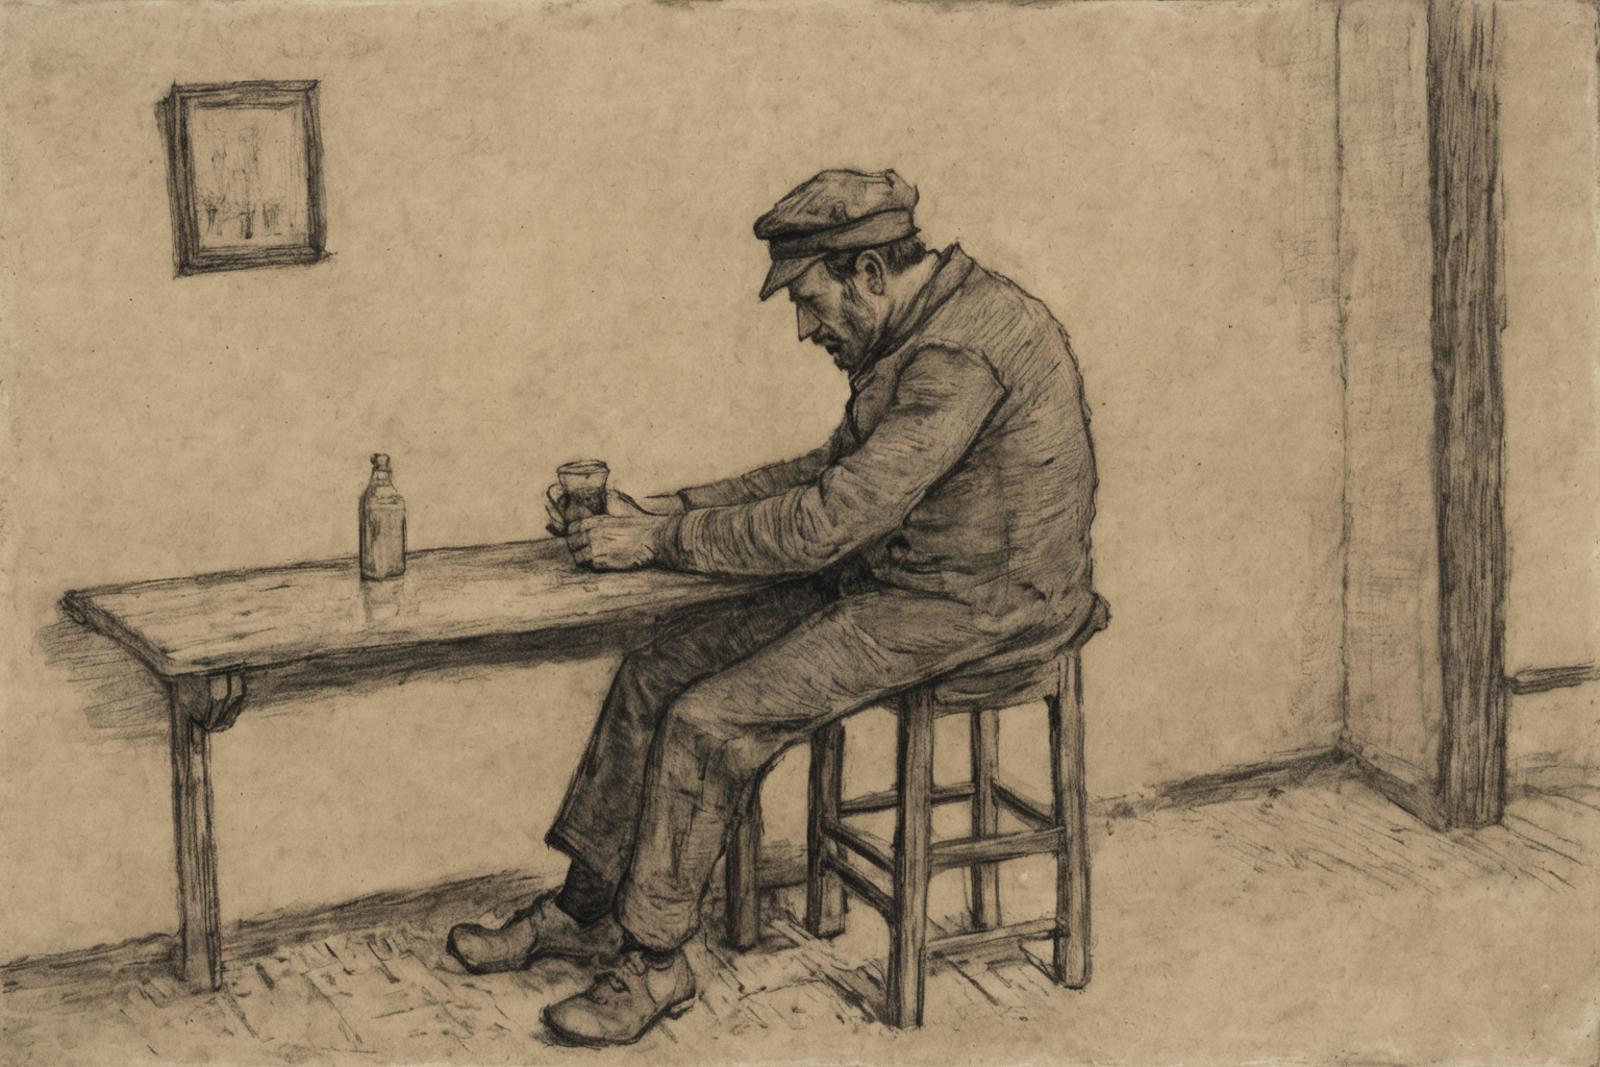 Man Sitting on Stool and Drinking from Glass: A Painting